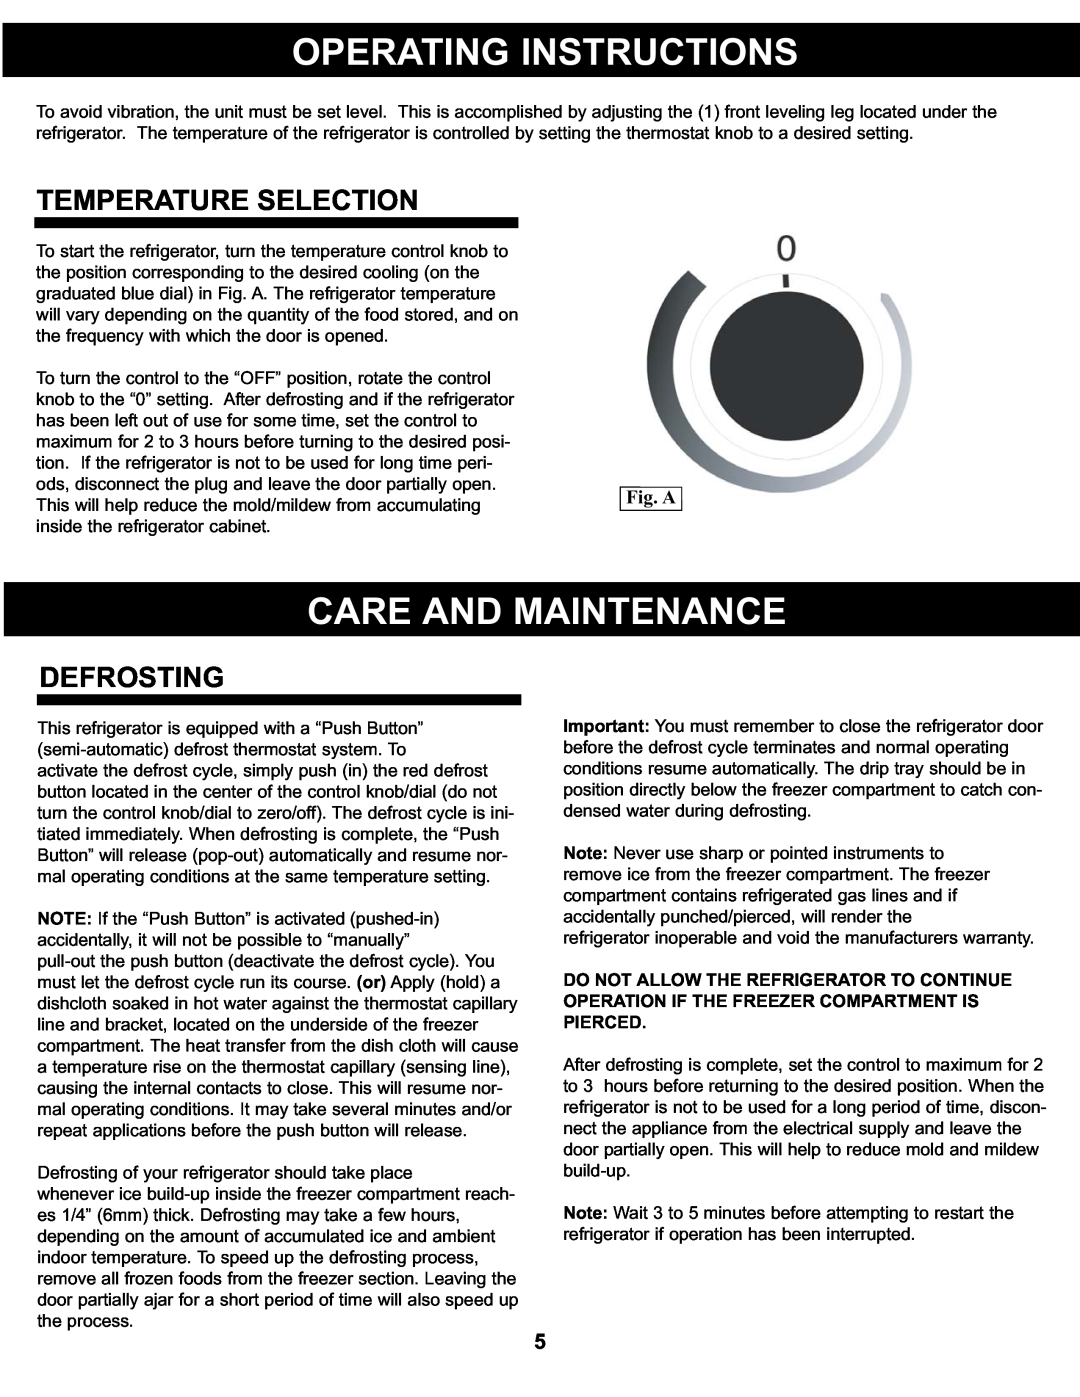 Danby DCR122BSLDD manual Operating Instructions, Care And Maintenance, Temperature Selection, Defrosting, Fig. A 